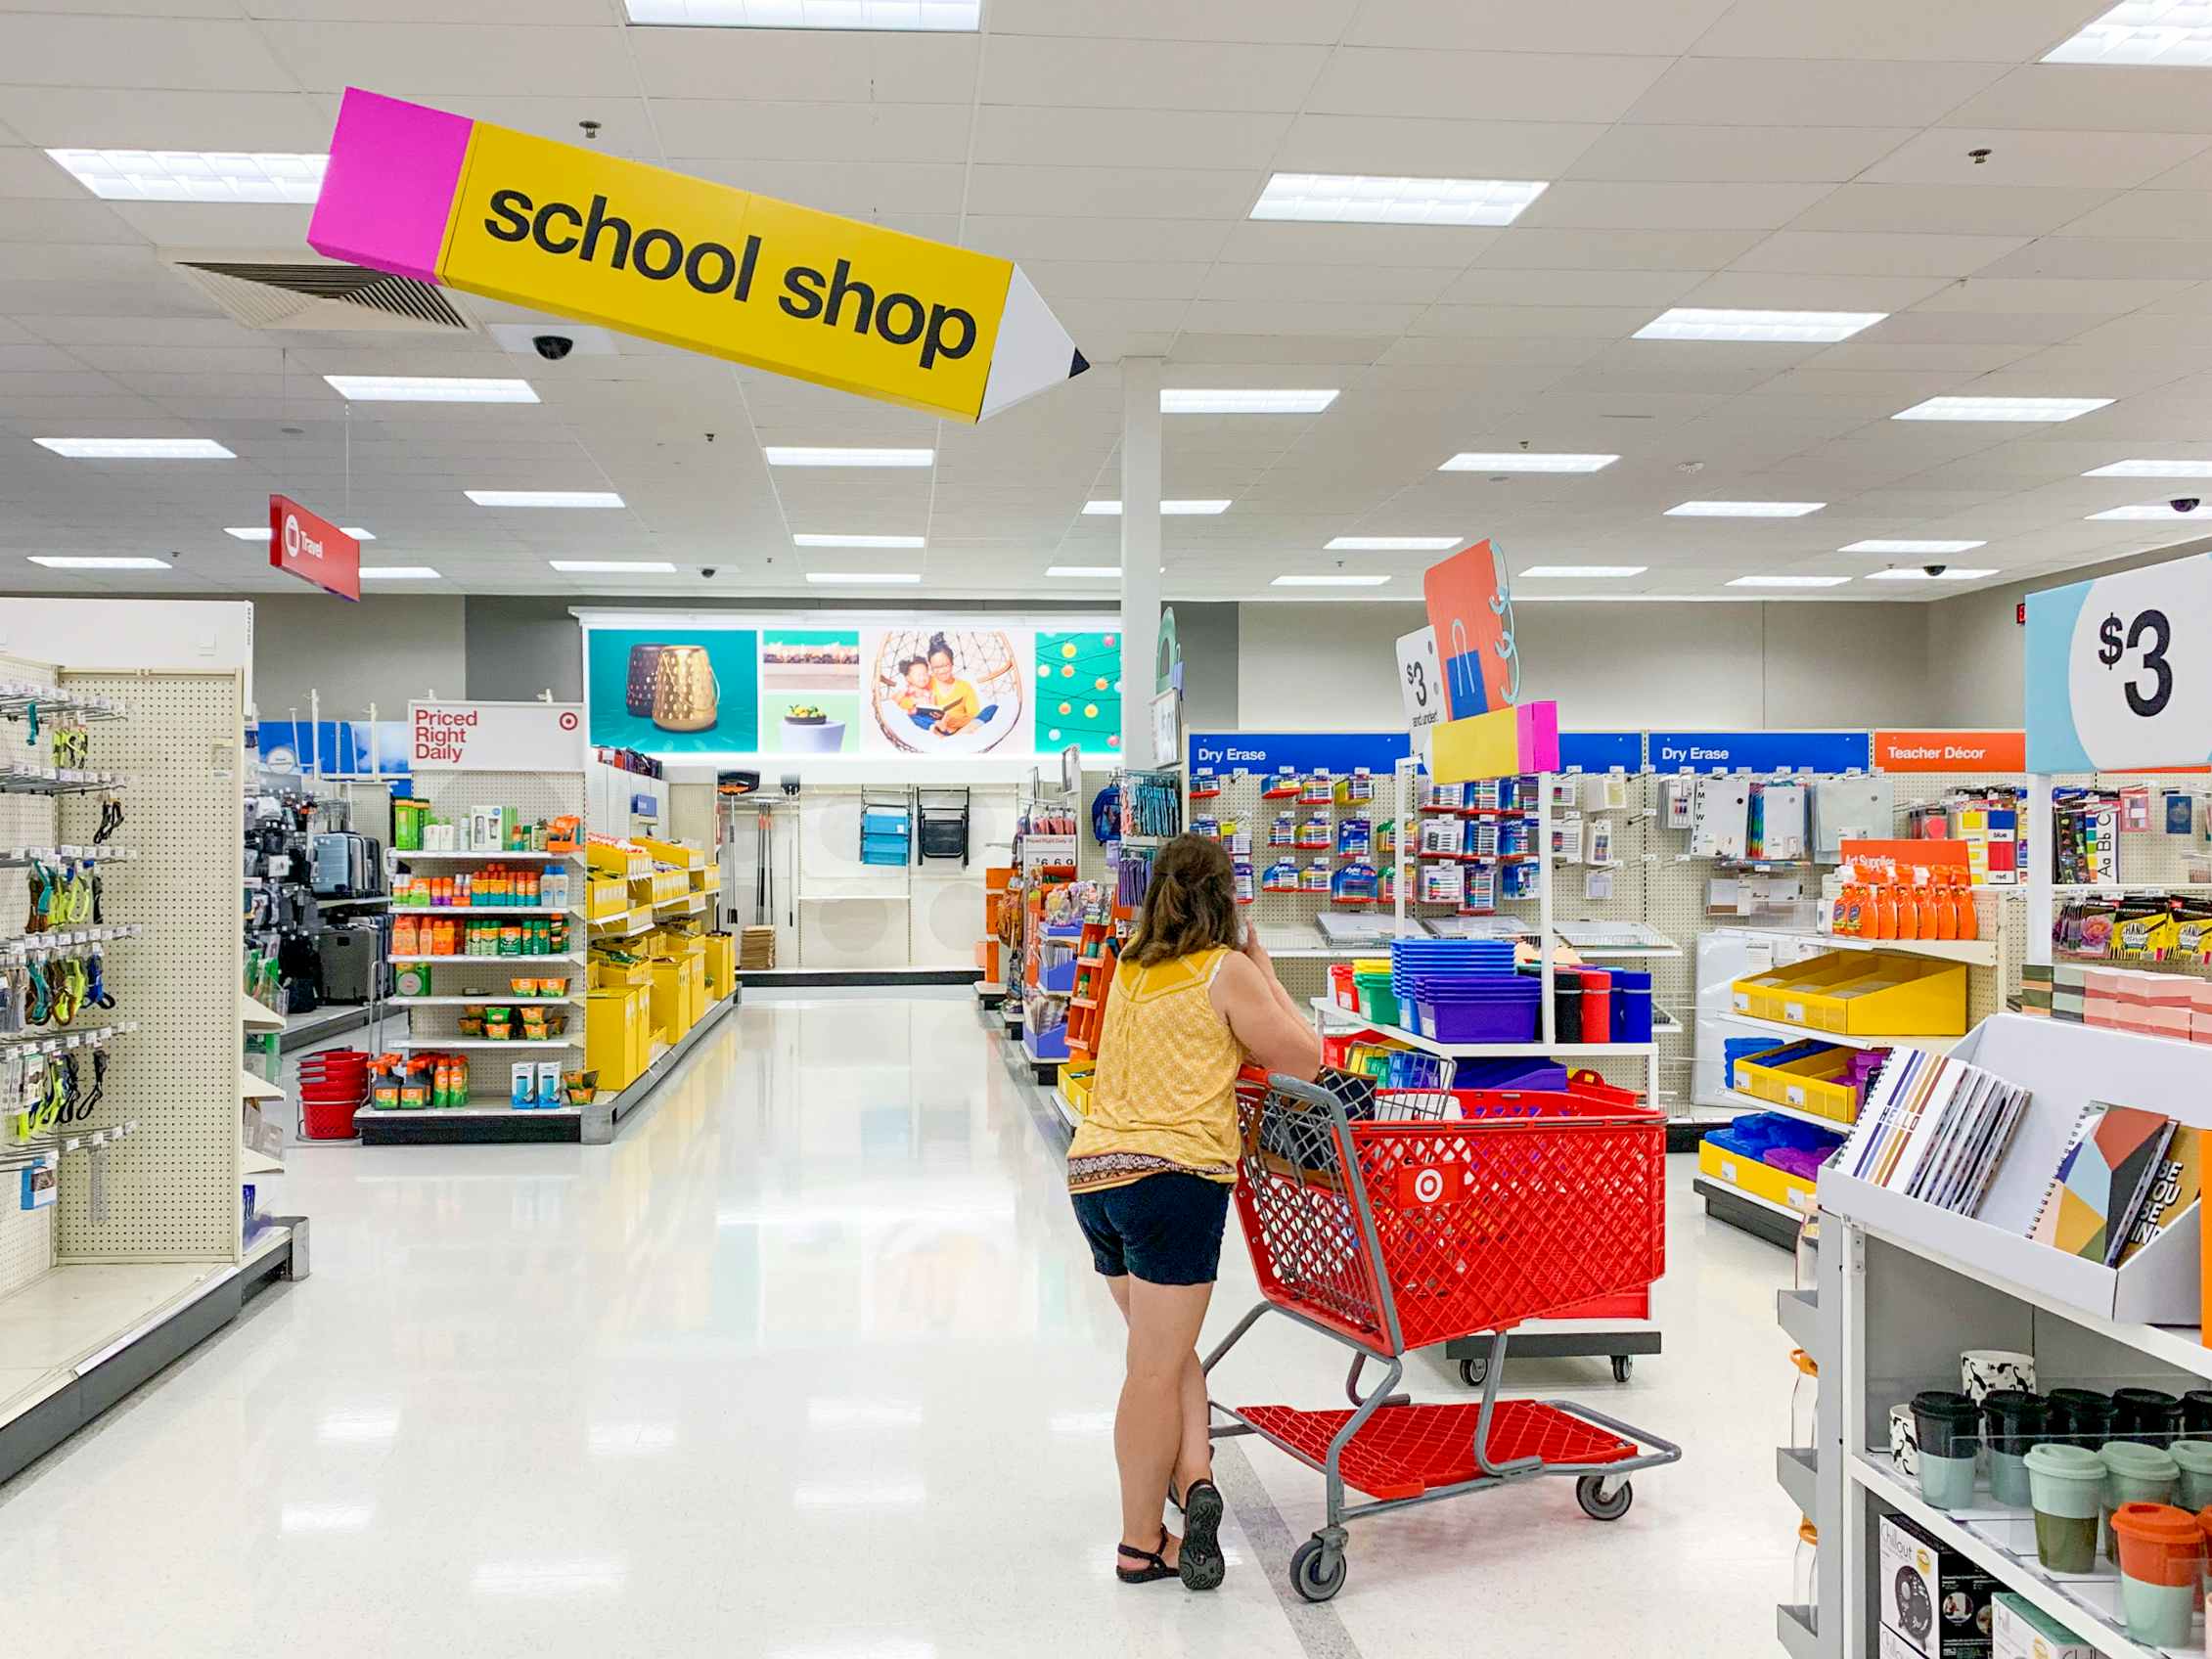 https://prod-cdn-thekrazycouponlady.imgix.net/wp-content/uploads/2022/07/target-back-to-school-supply-section-2020-01-1657812811-1657812811.jpg?auto=format&fit=fill&q=25